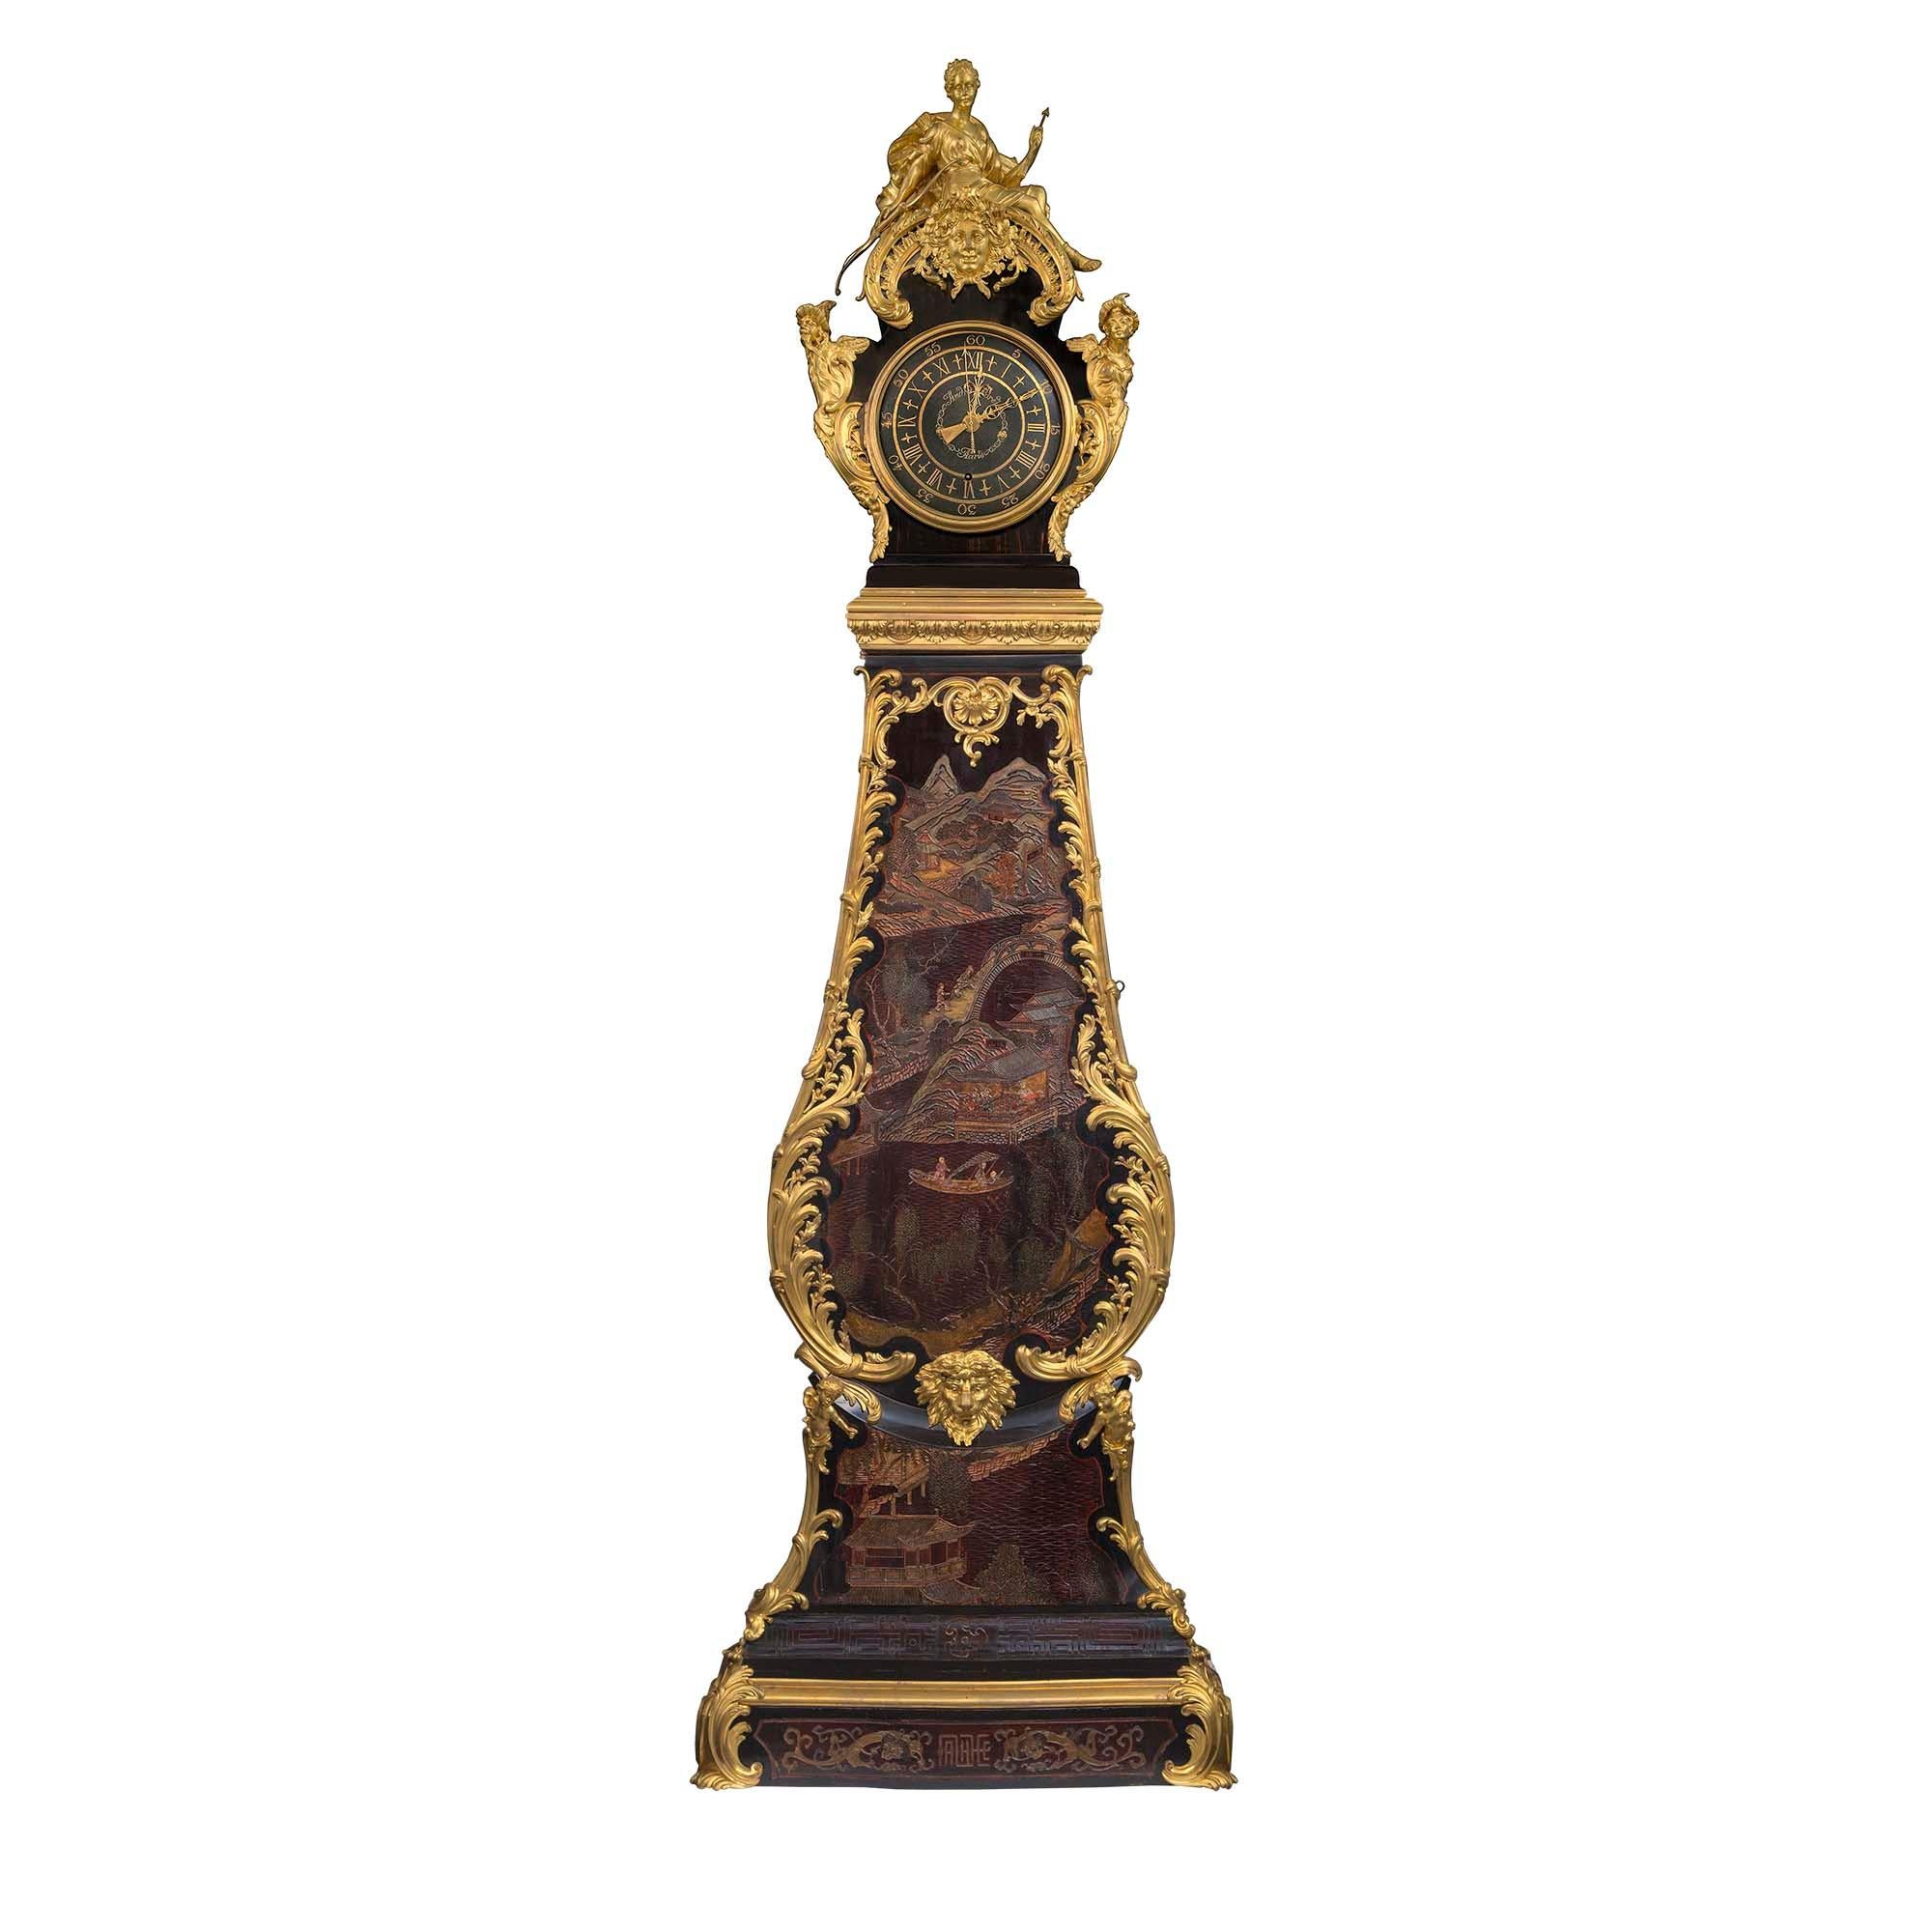 A magnificent large scale French 18th century Coromandel and ormolu Grandfather Clock, by André Furet. This very unique and high quality clock is raised by rectangular base with a lightly bombé front and impressive large acanthus leaf corner ormolu